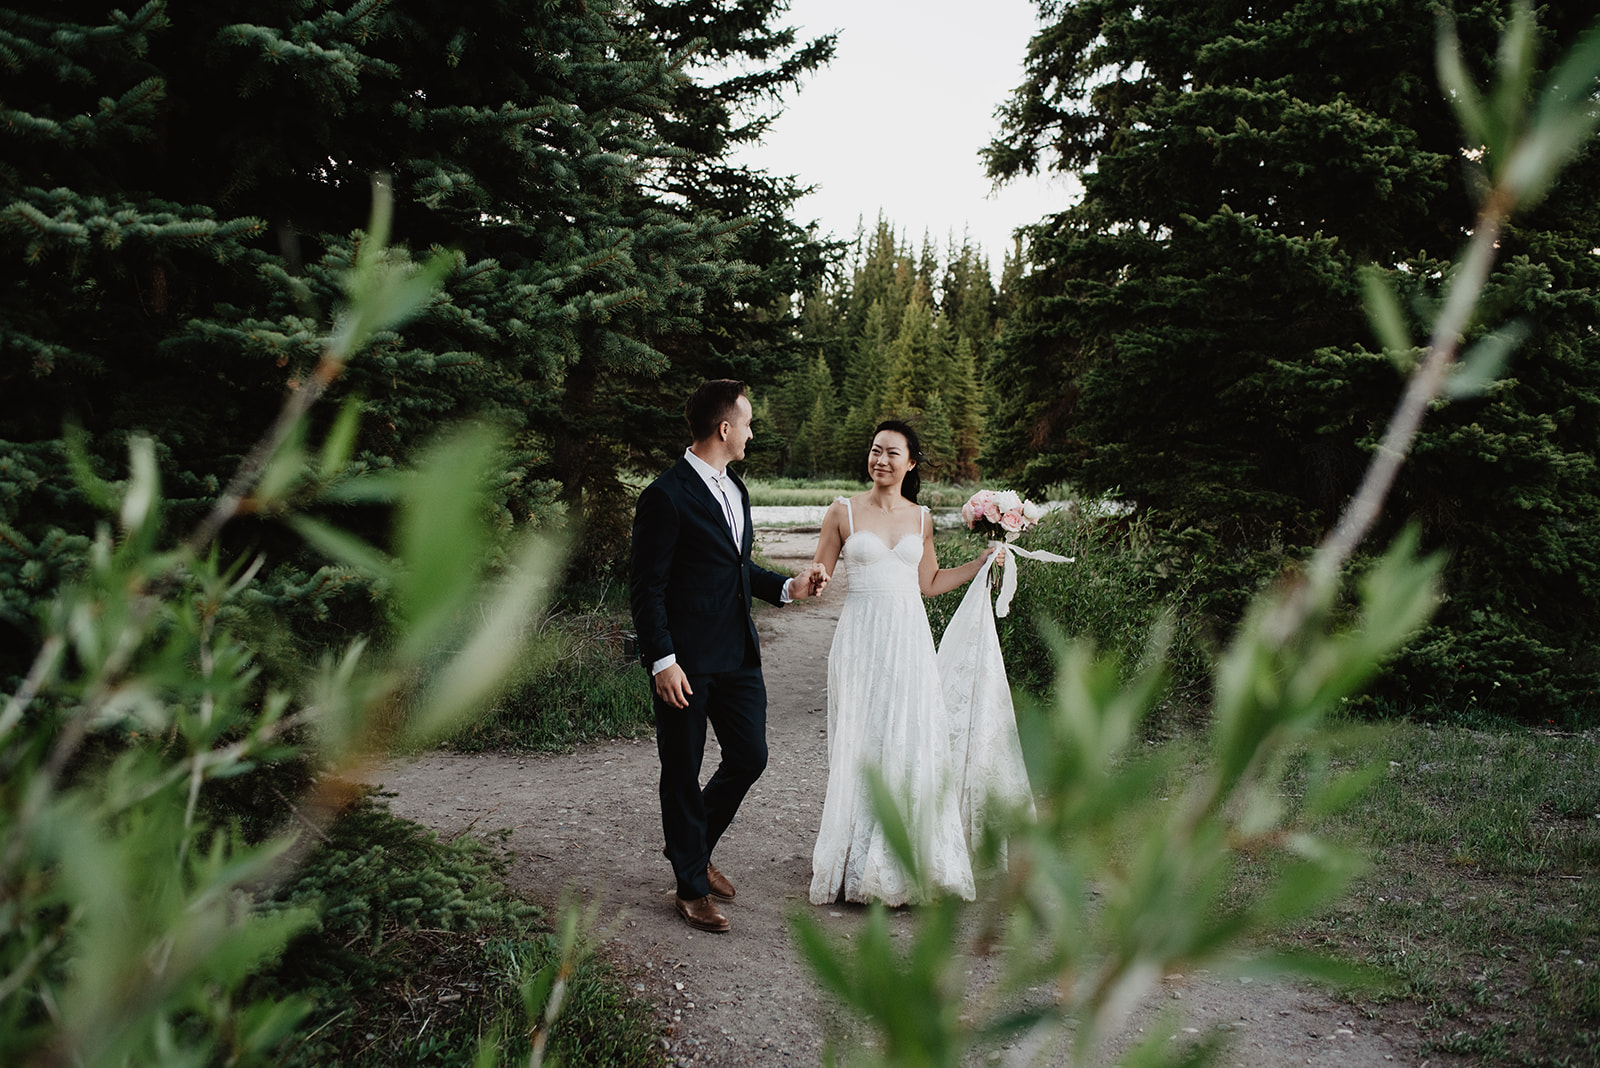 adventurous bride and groom have a wedding photo session in the Grand Tetons for their destination wedding day as they hold hands and walk down a trail together at sunset in the mountains